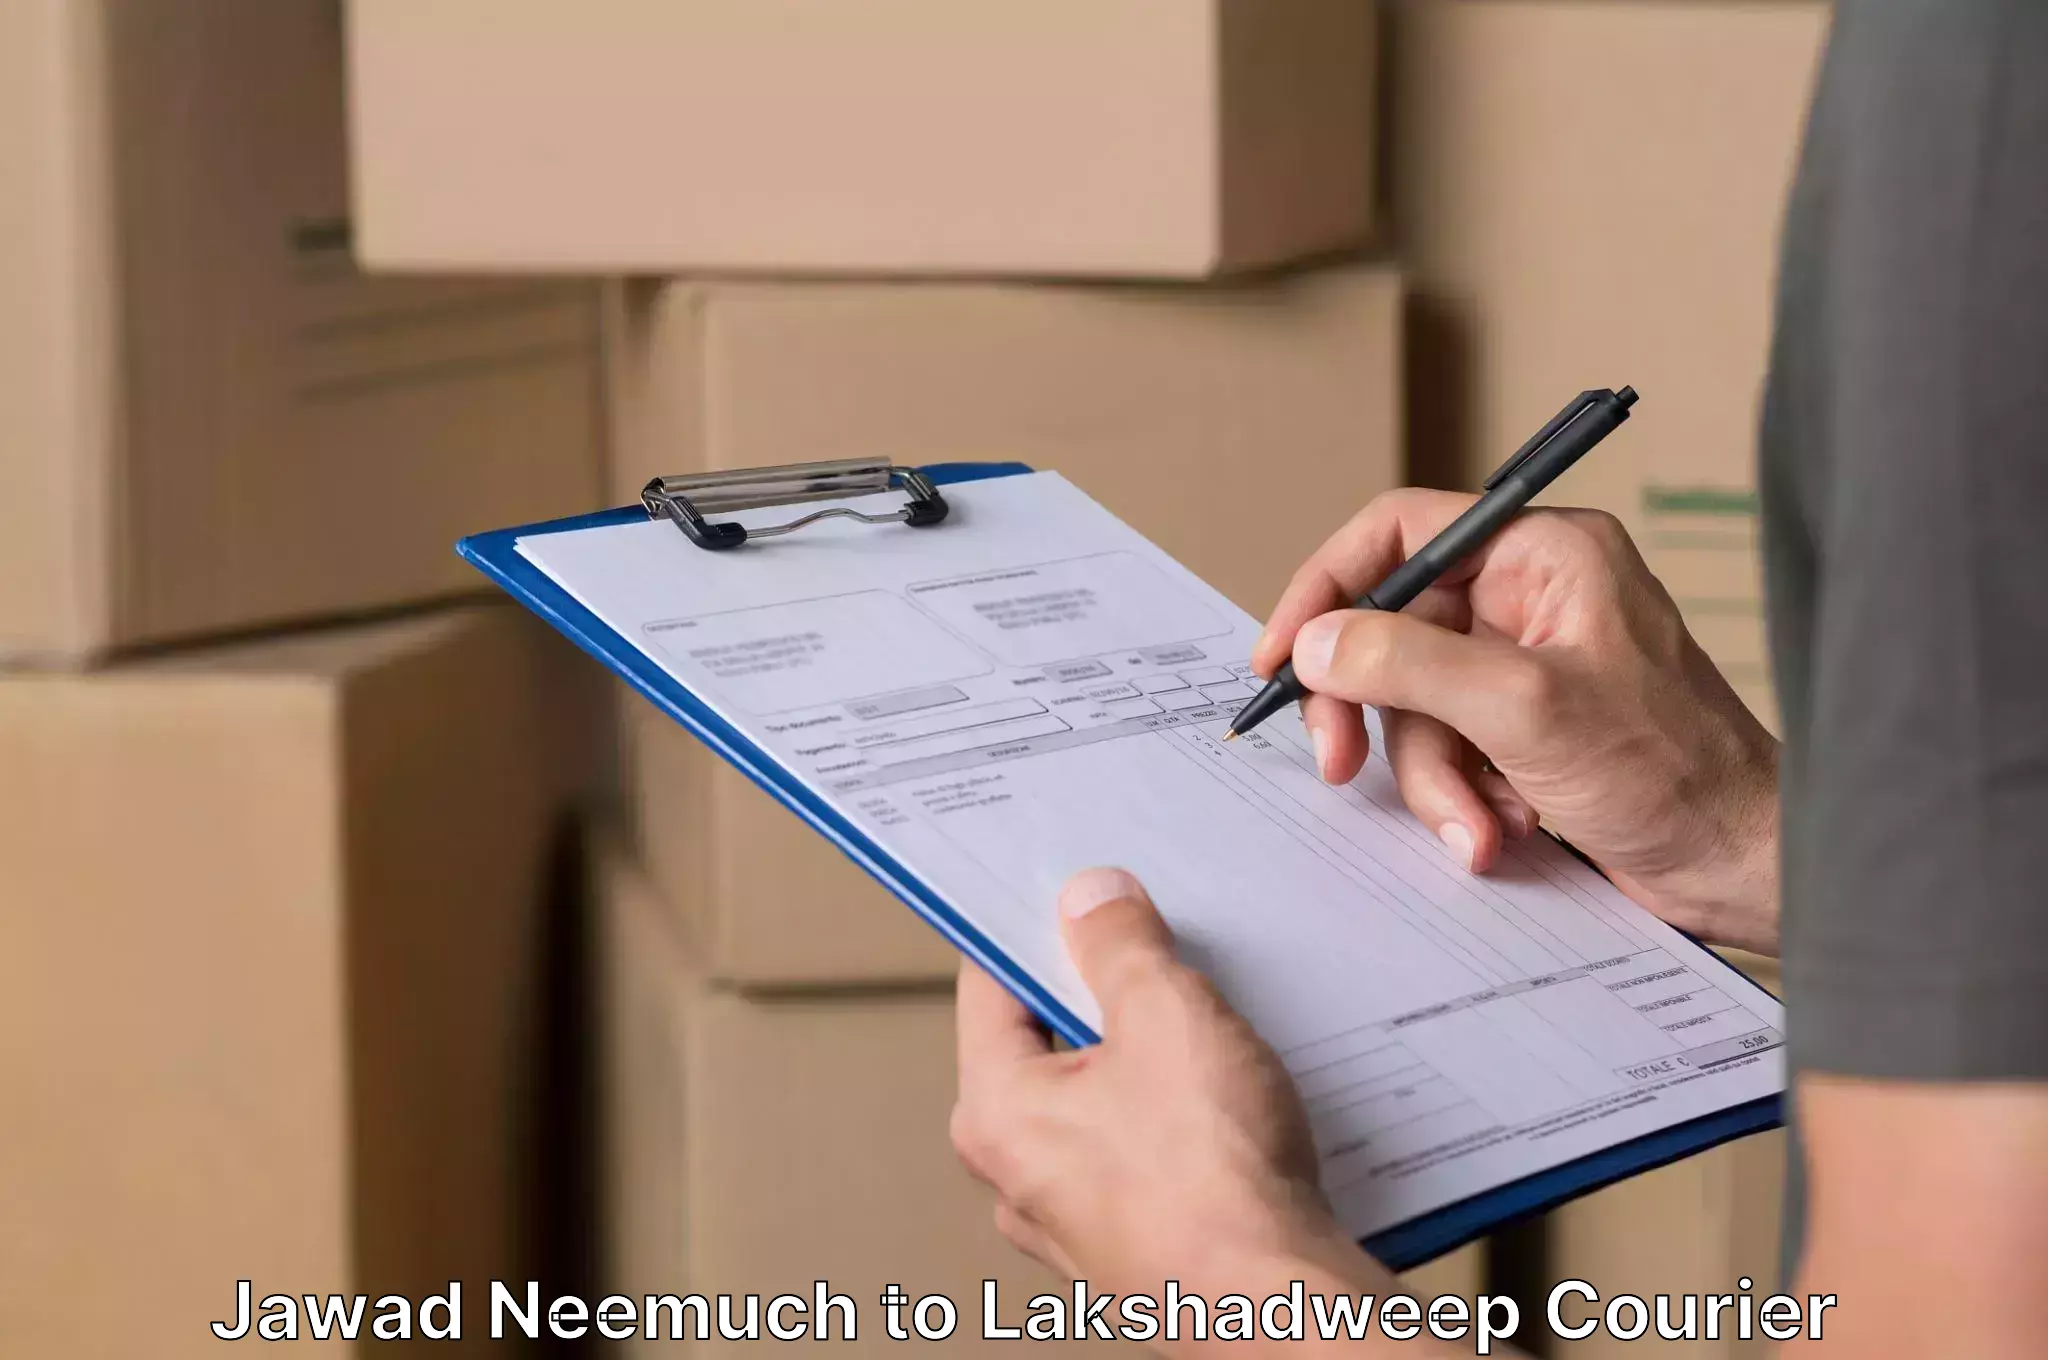 Furniture transport services Jawad Neemuch to Lakshadweep